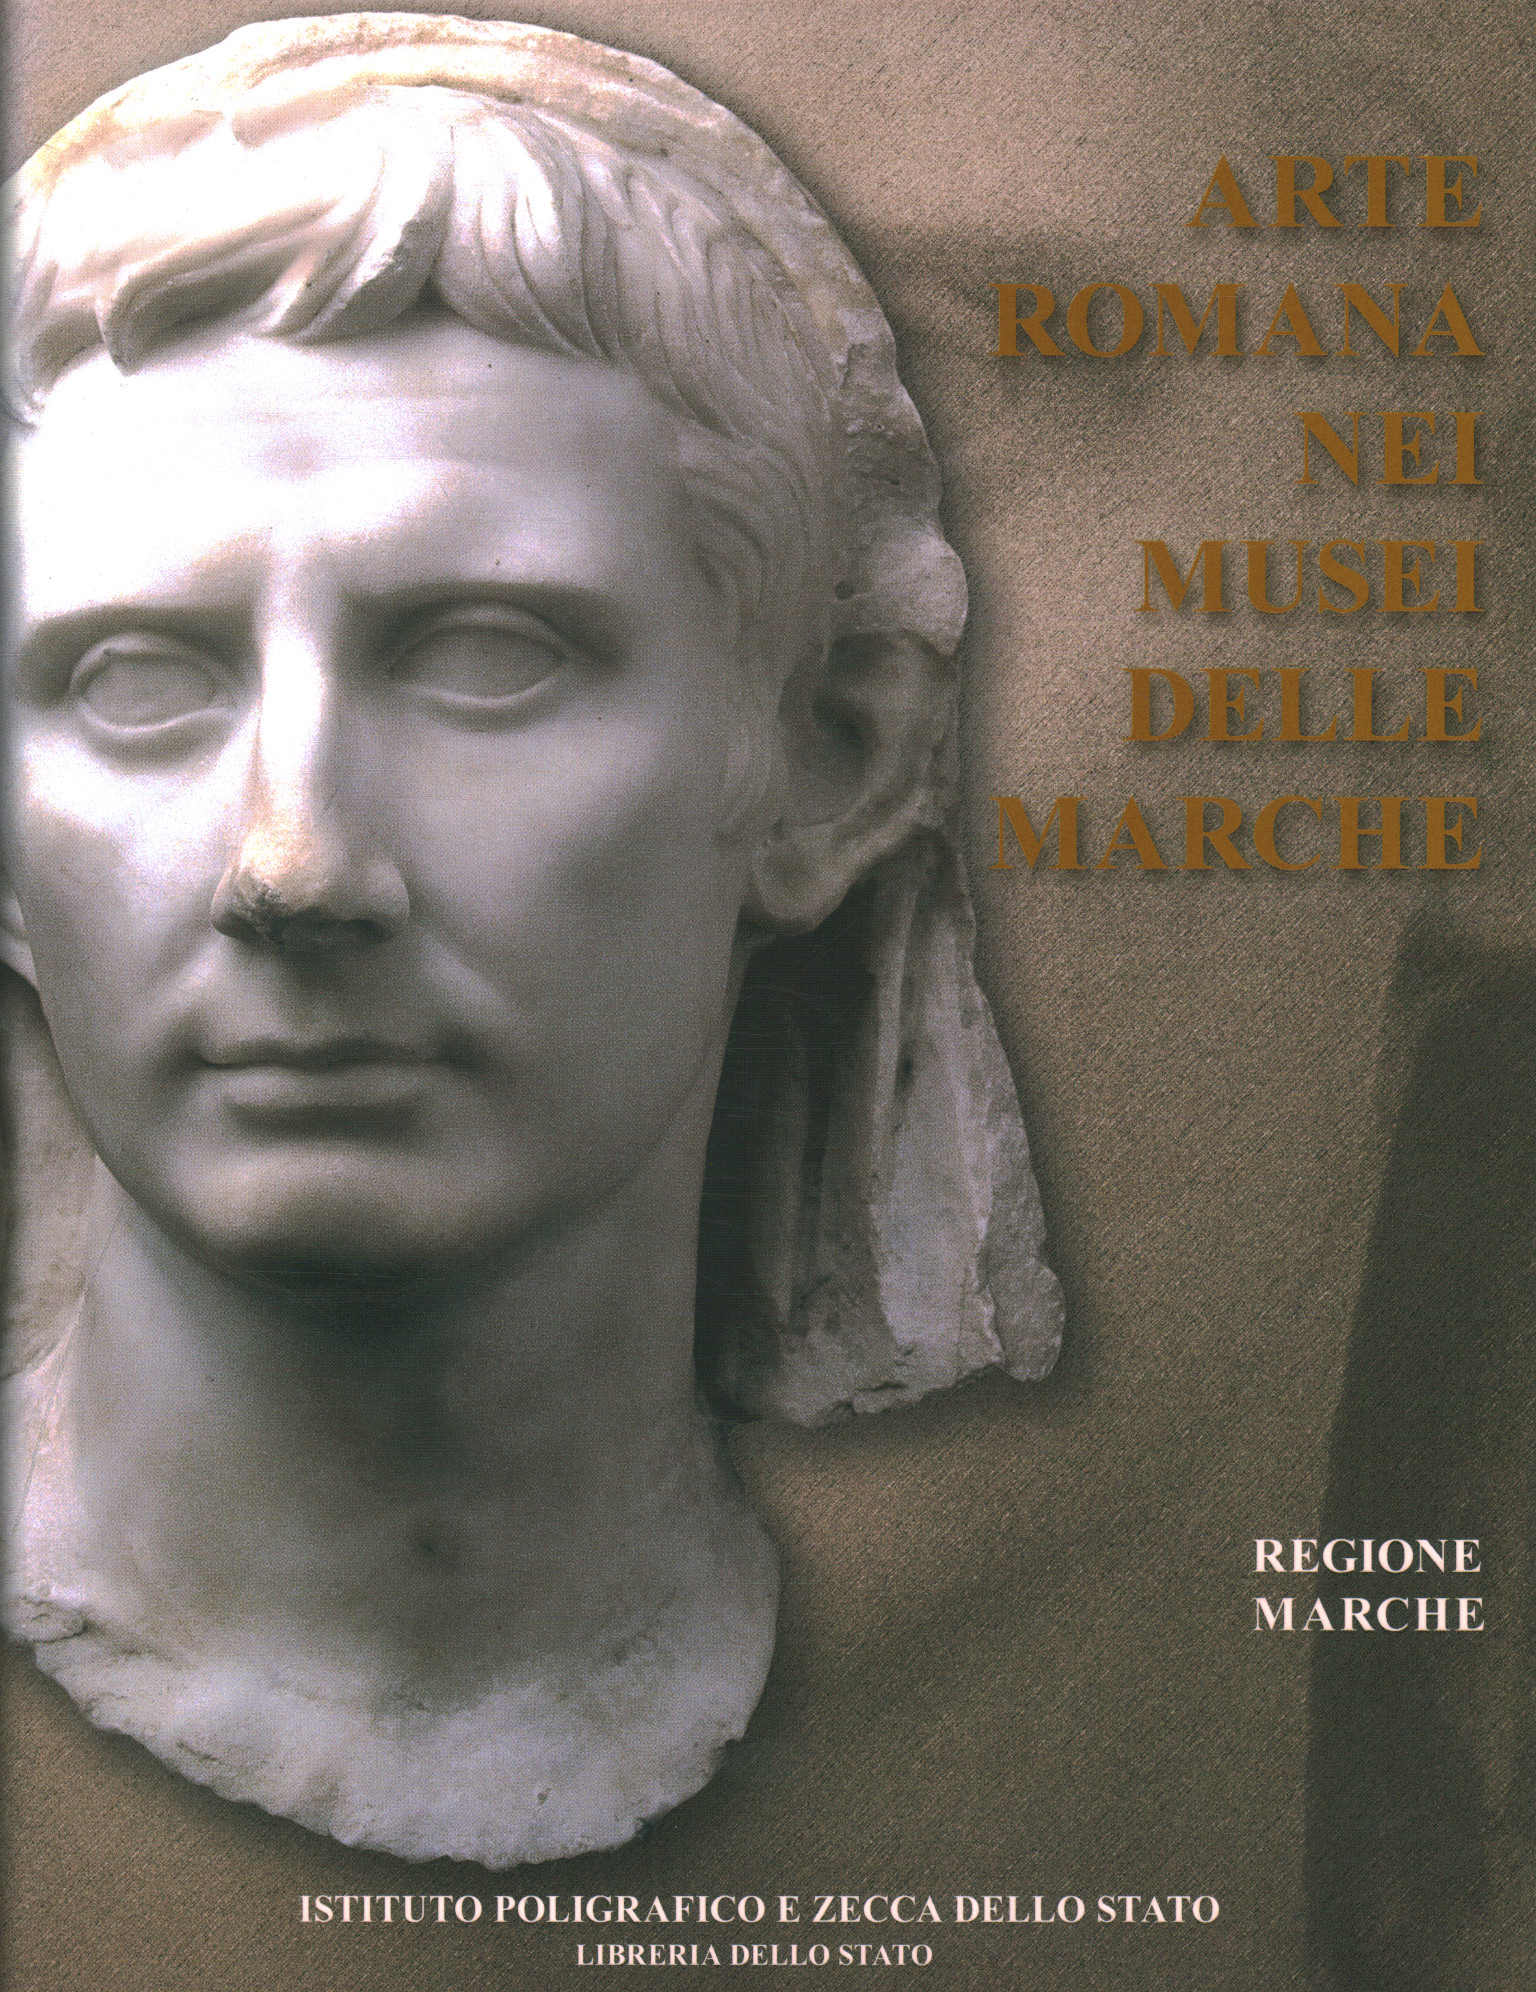 Roman art in the museums of the Marches